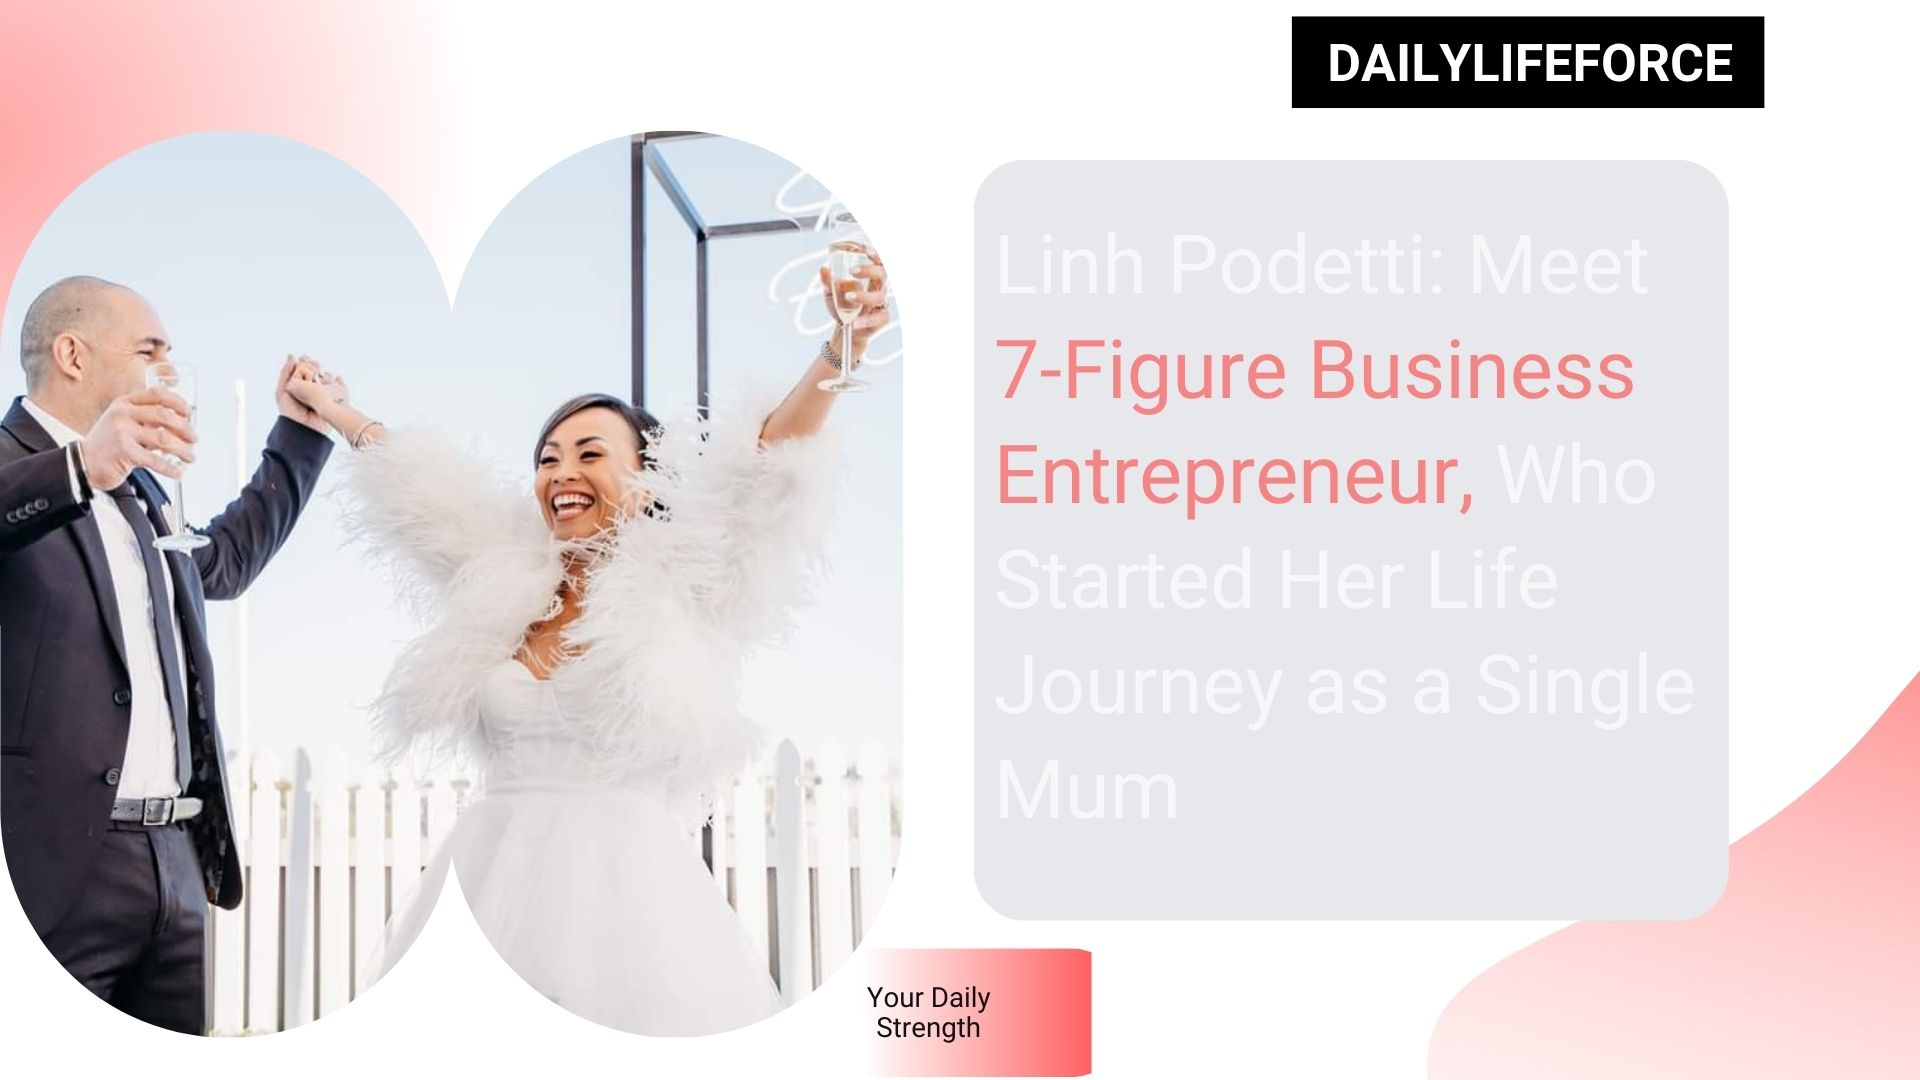 Linh Podetti: Meet 7-Figure Business Entrepreneur, Who Started Her Life Journey as a Single Mum